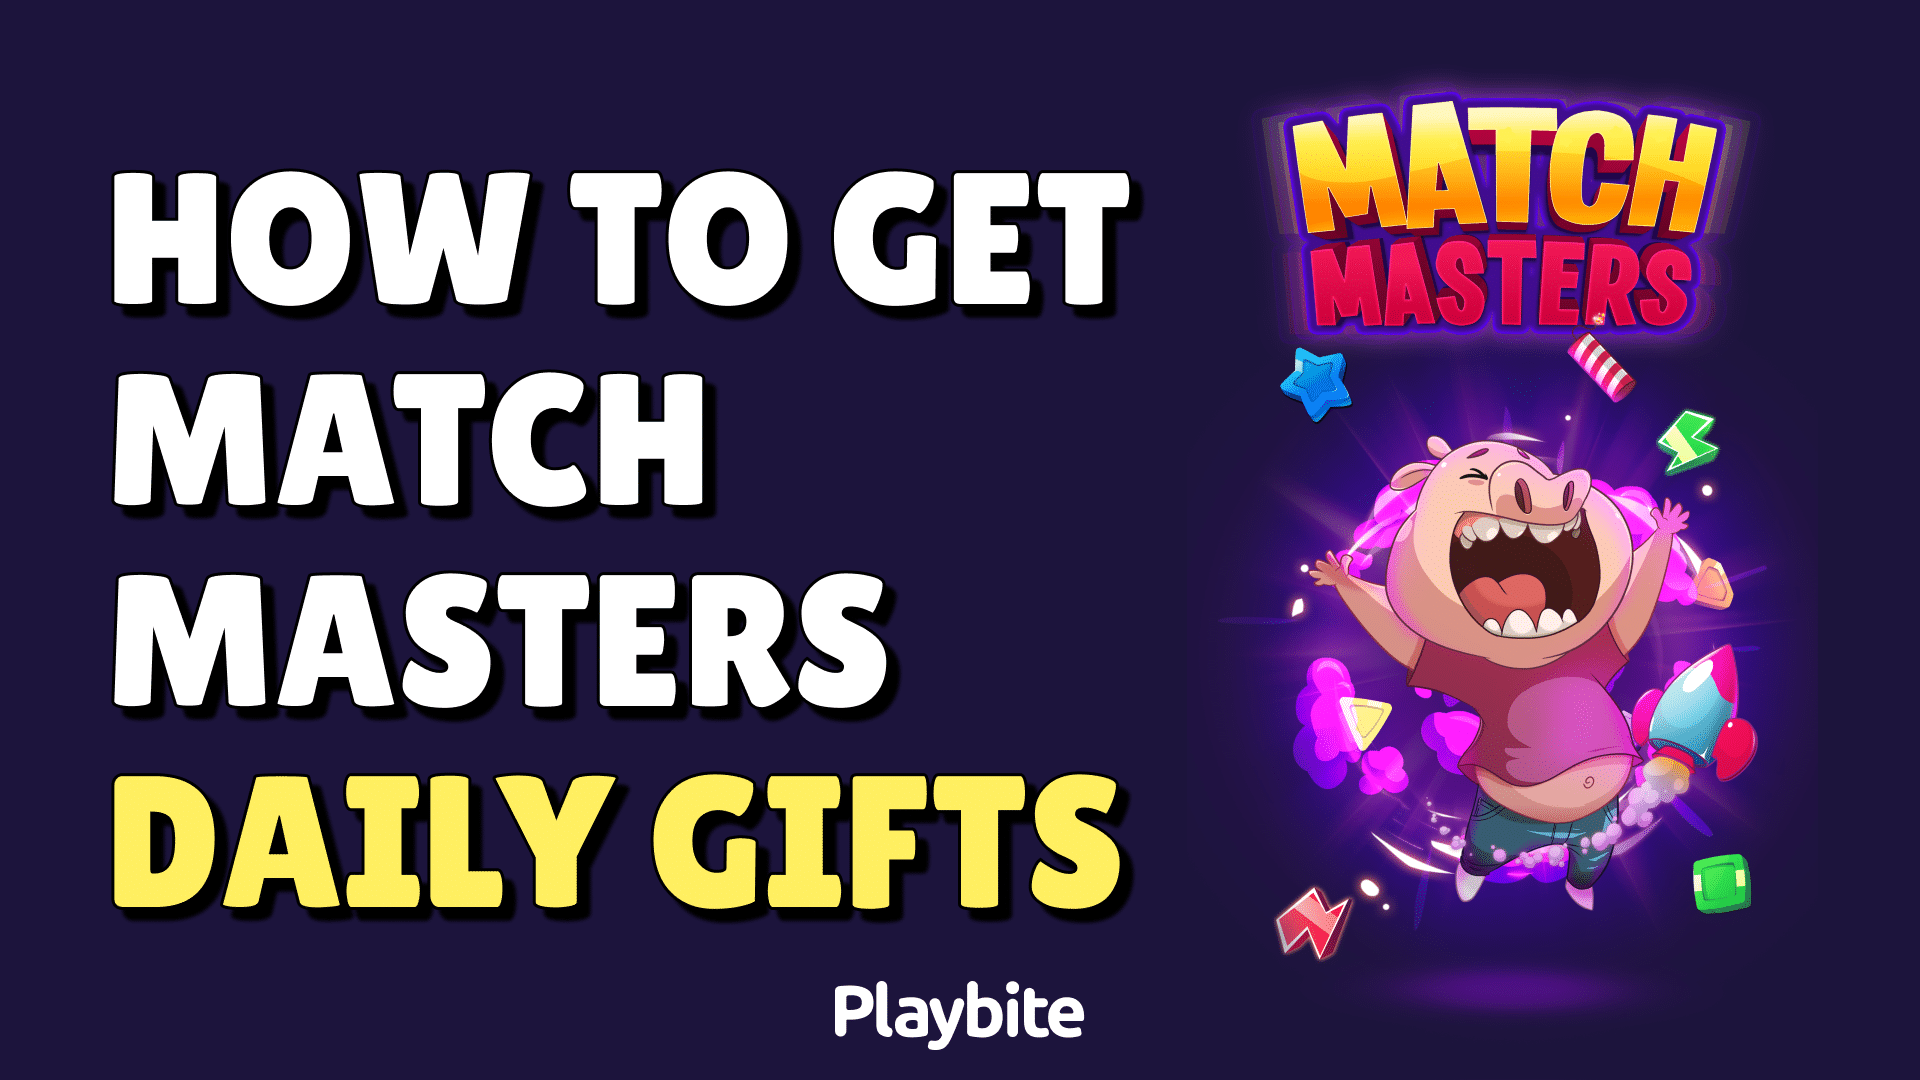 How To Get Match Masters Daily Gifts